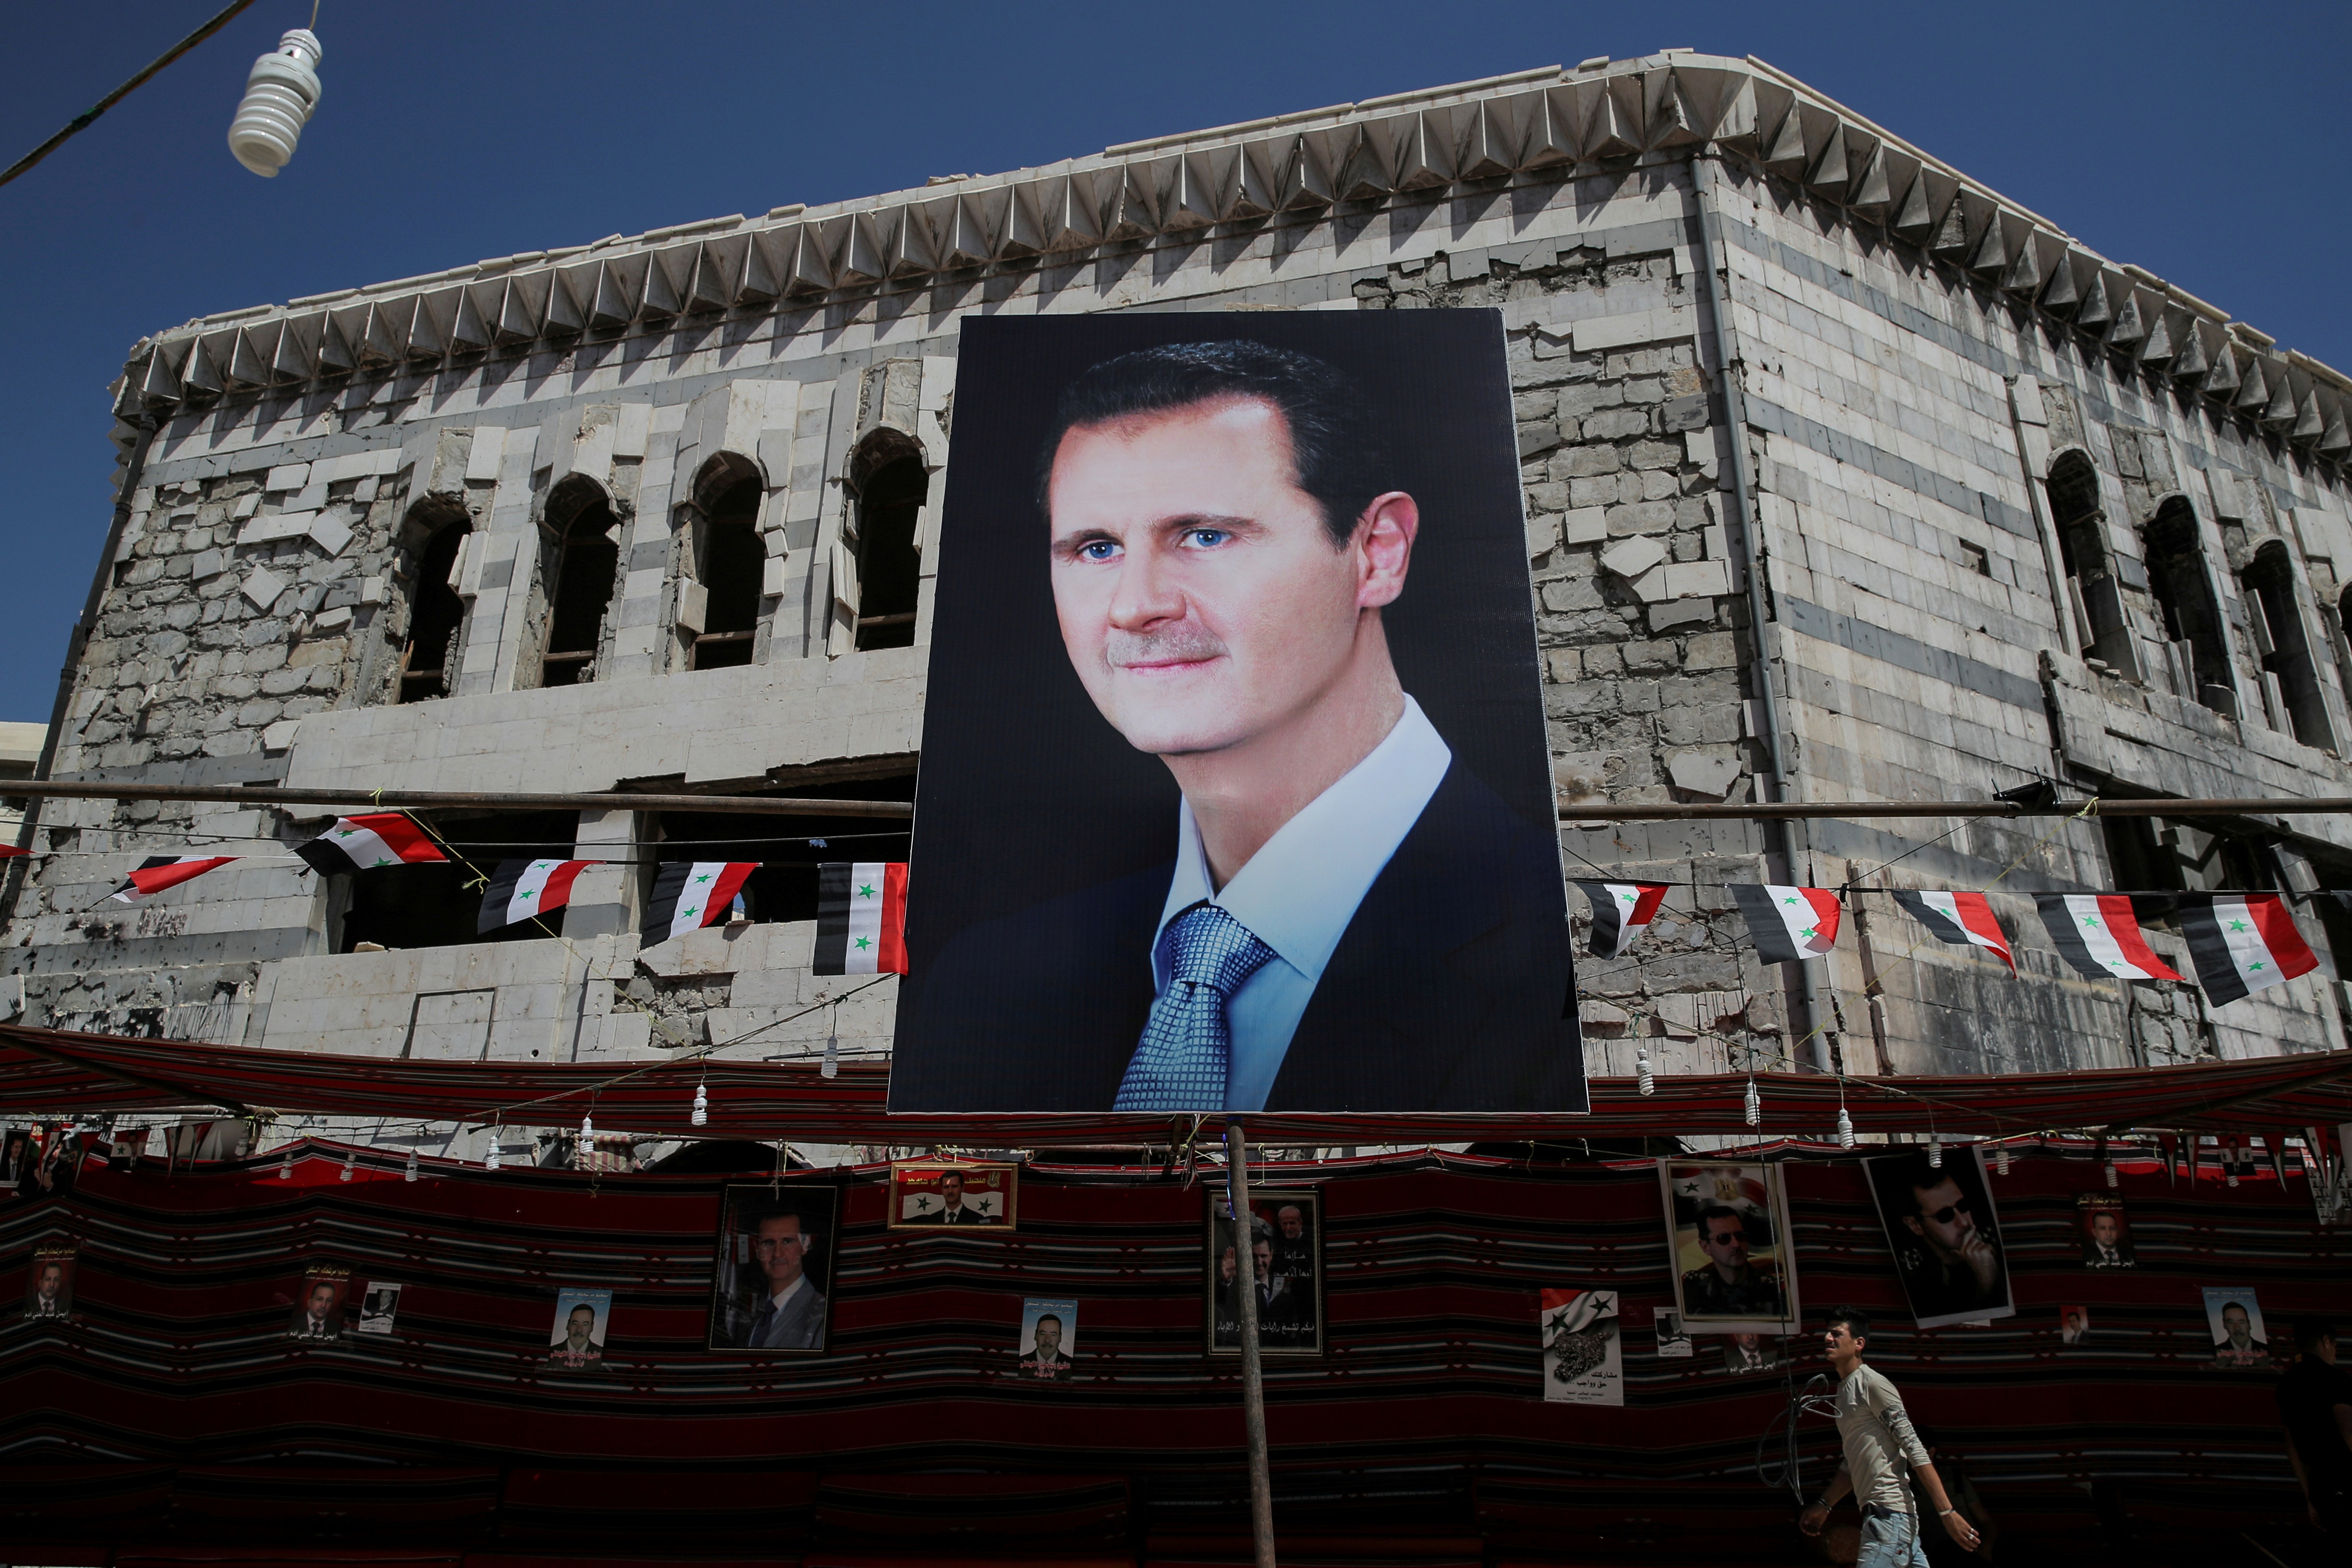 Bloody red carpet: Assad returns to international stage with Arab League welcome